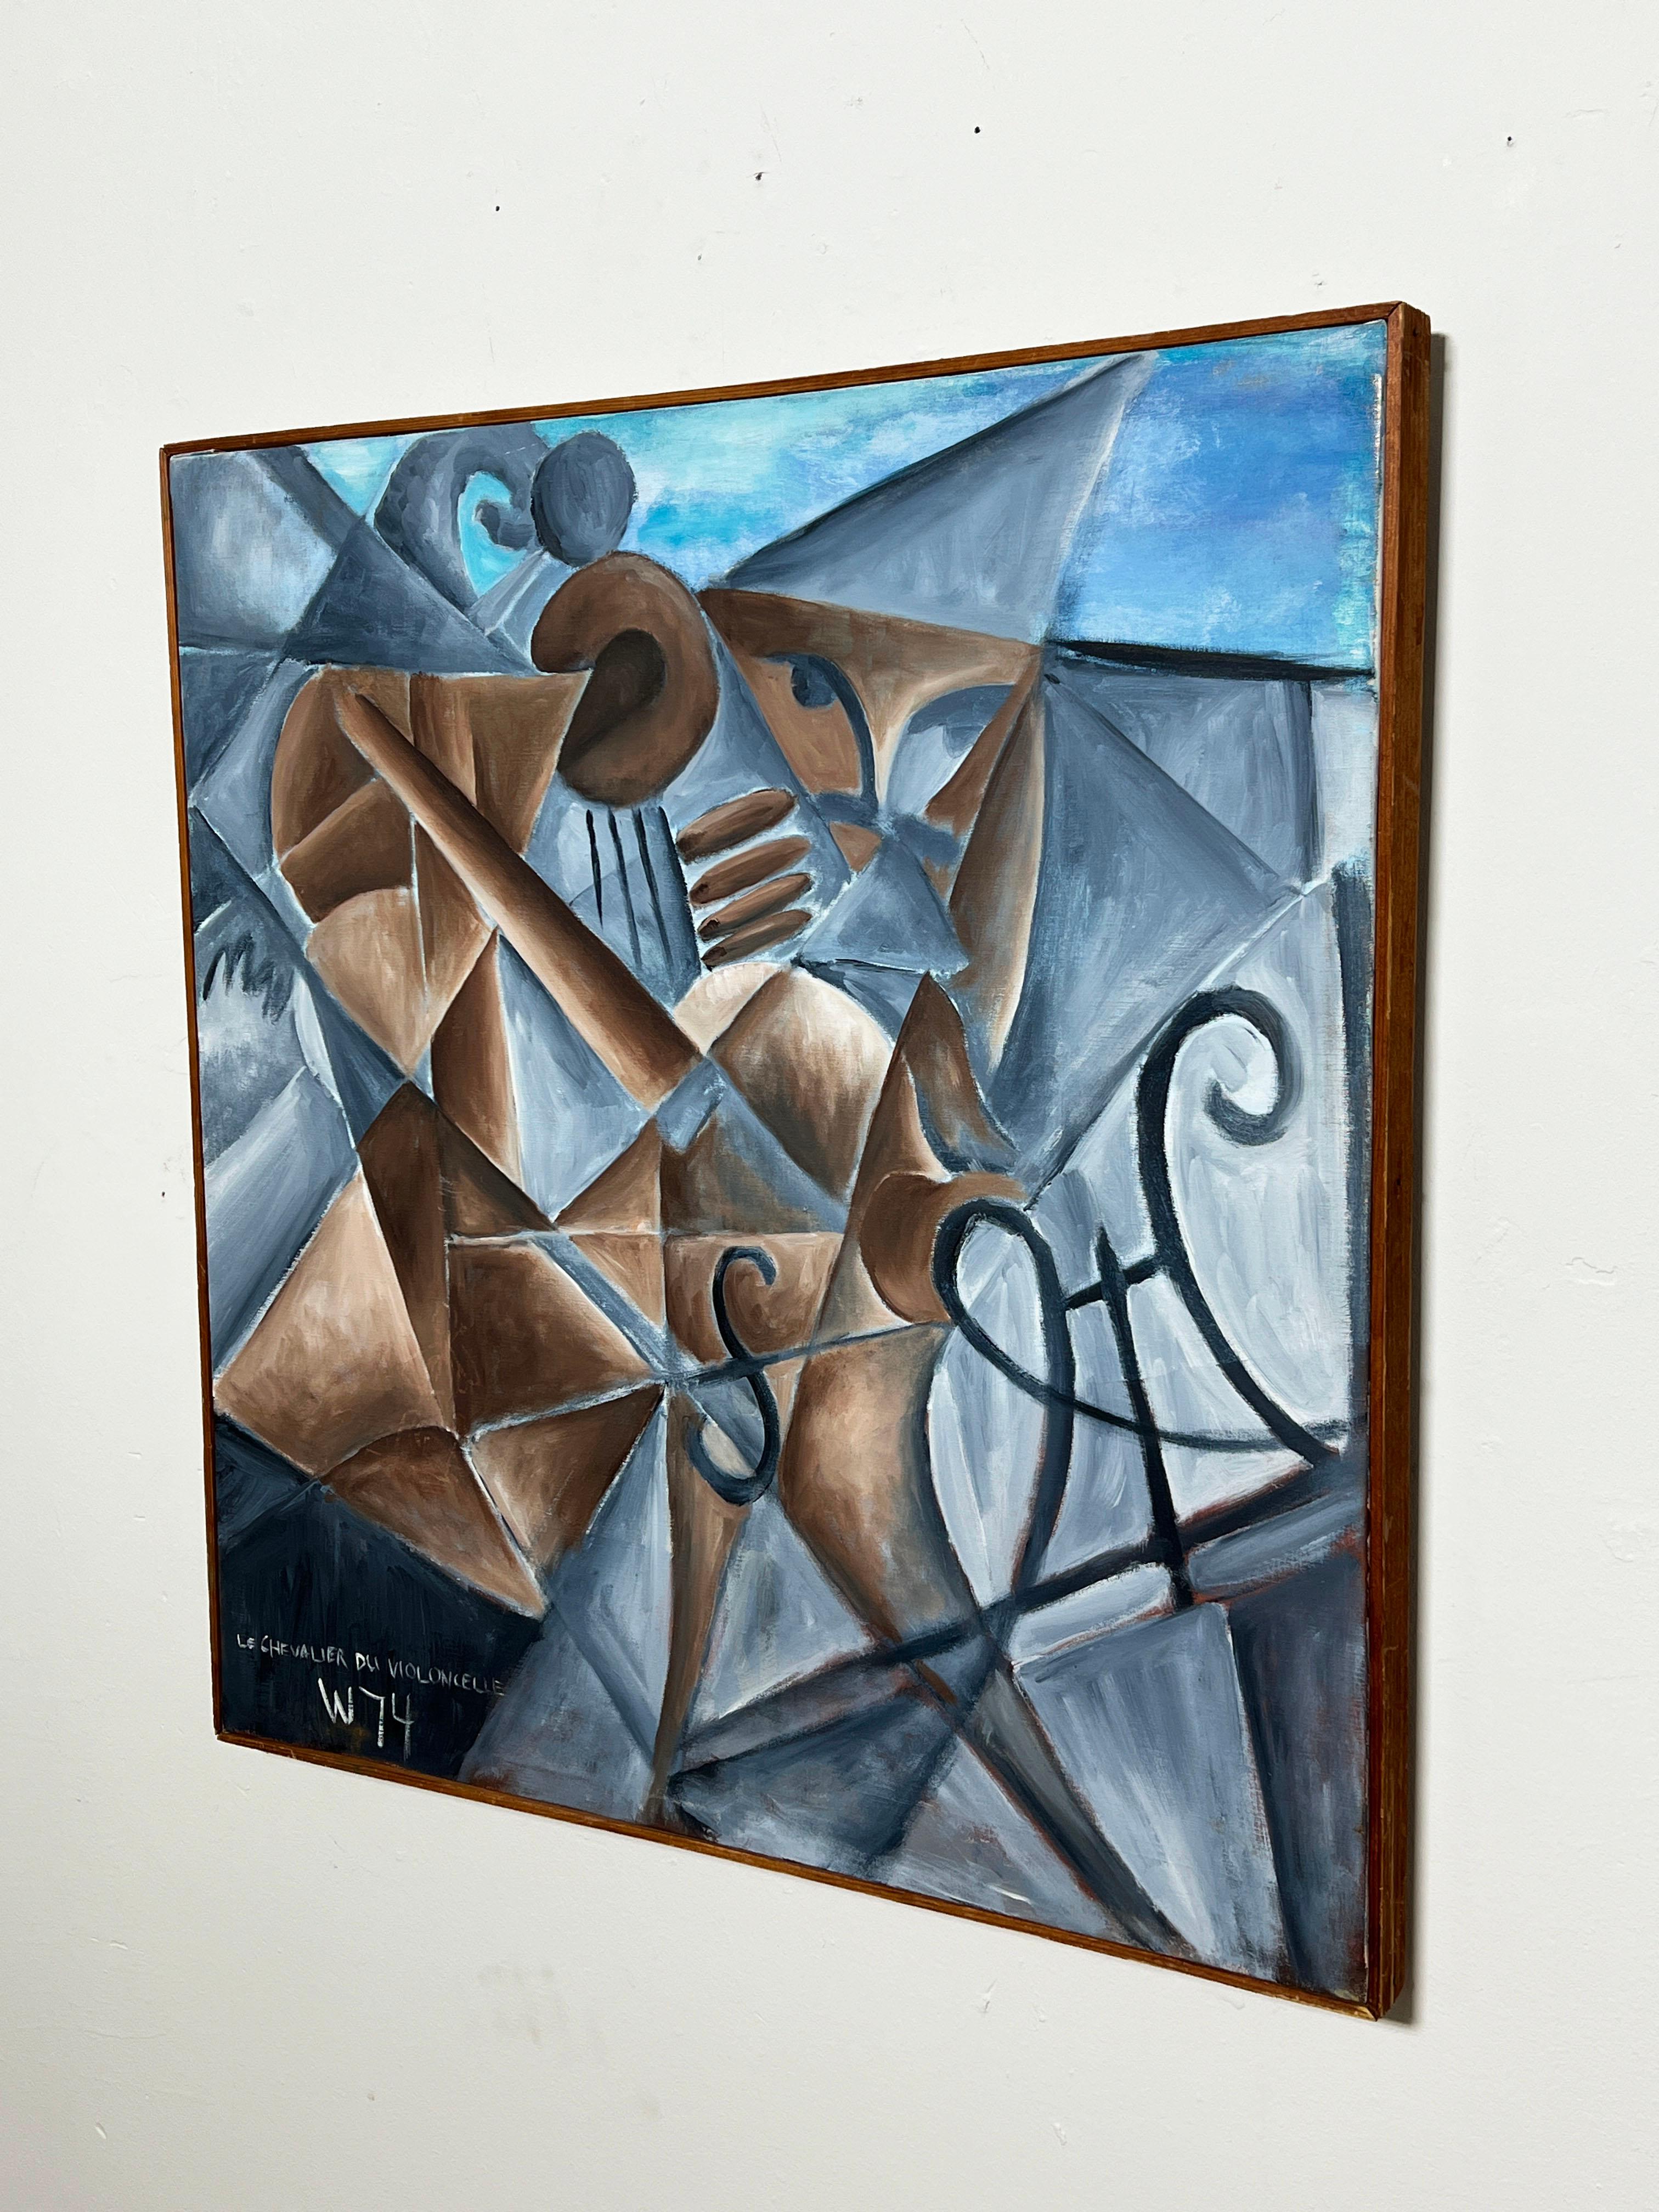 A modern abstract cubist composition in the manner of the jazz age paintings of Stuart Davis, entitled “The Knight of the Cello” (translated from French), dated 1974, signed Woodson Smith.